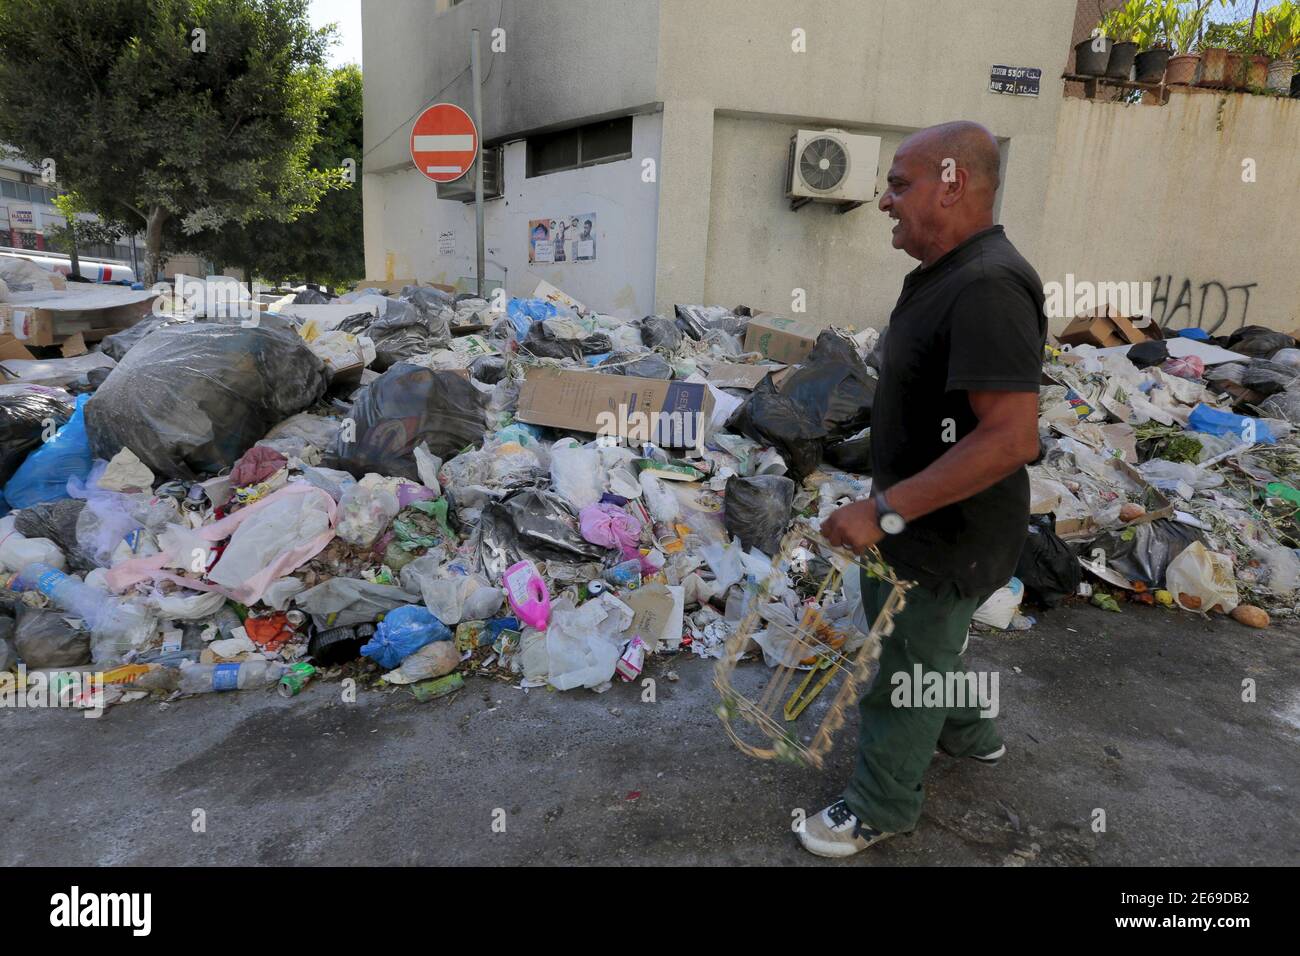 A man walks past a pile of garbage along a street in Beirut, Lebanon July  22, 2015. The streets of Beirut are quickly becoming host to growing  mountain of garbage after a